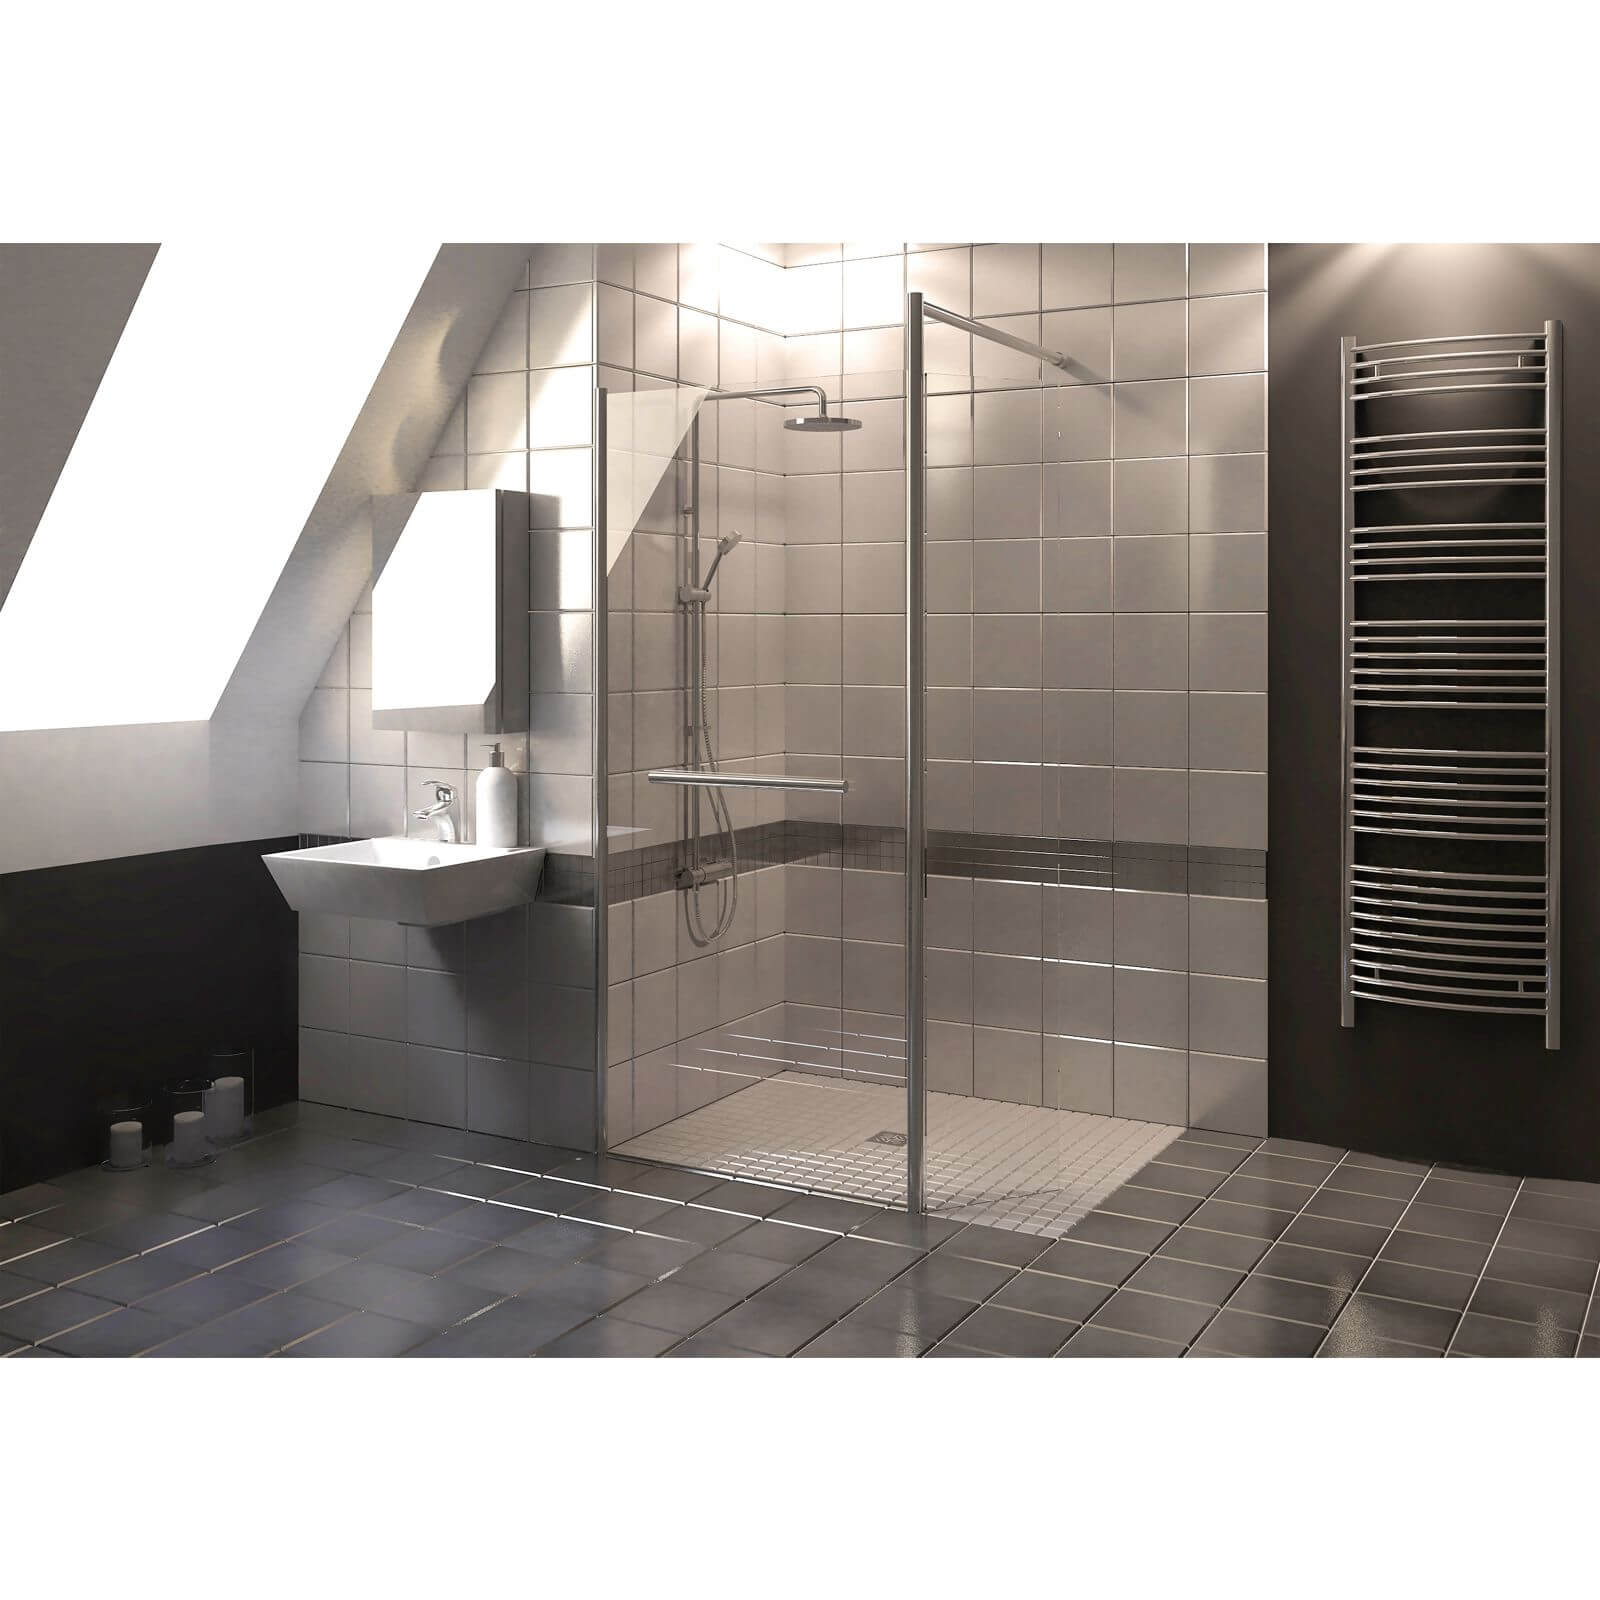 Wet Room Kit with 900mm Straight Glass Panel, 350mm Rotating Pivot Panel & 1400mm Tray